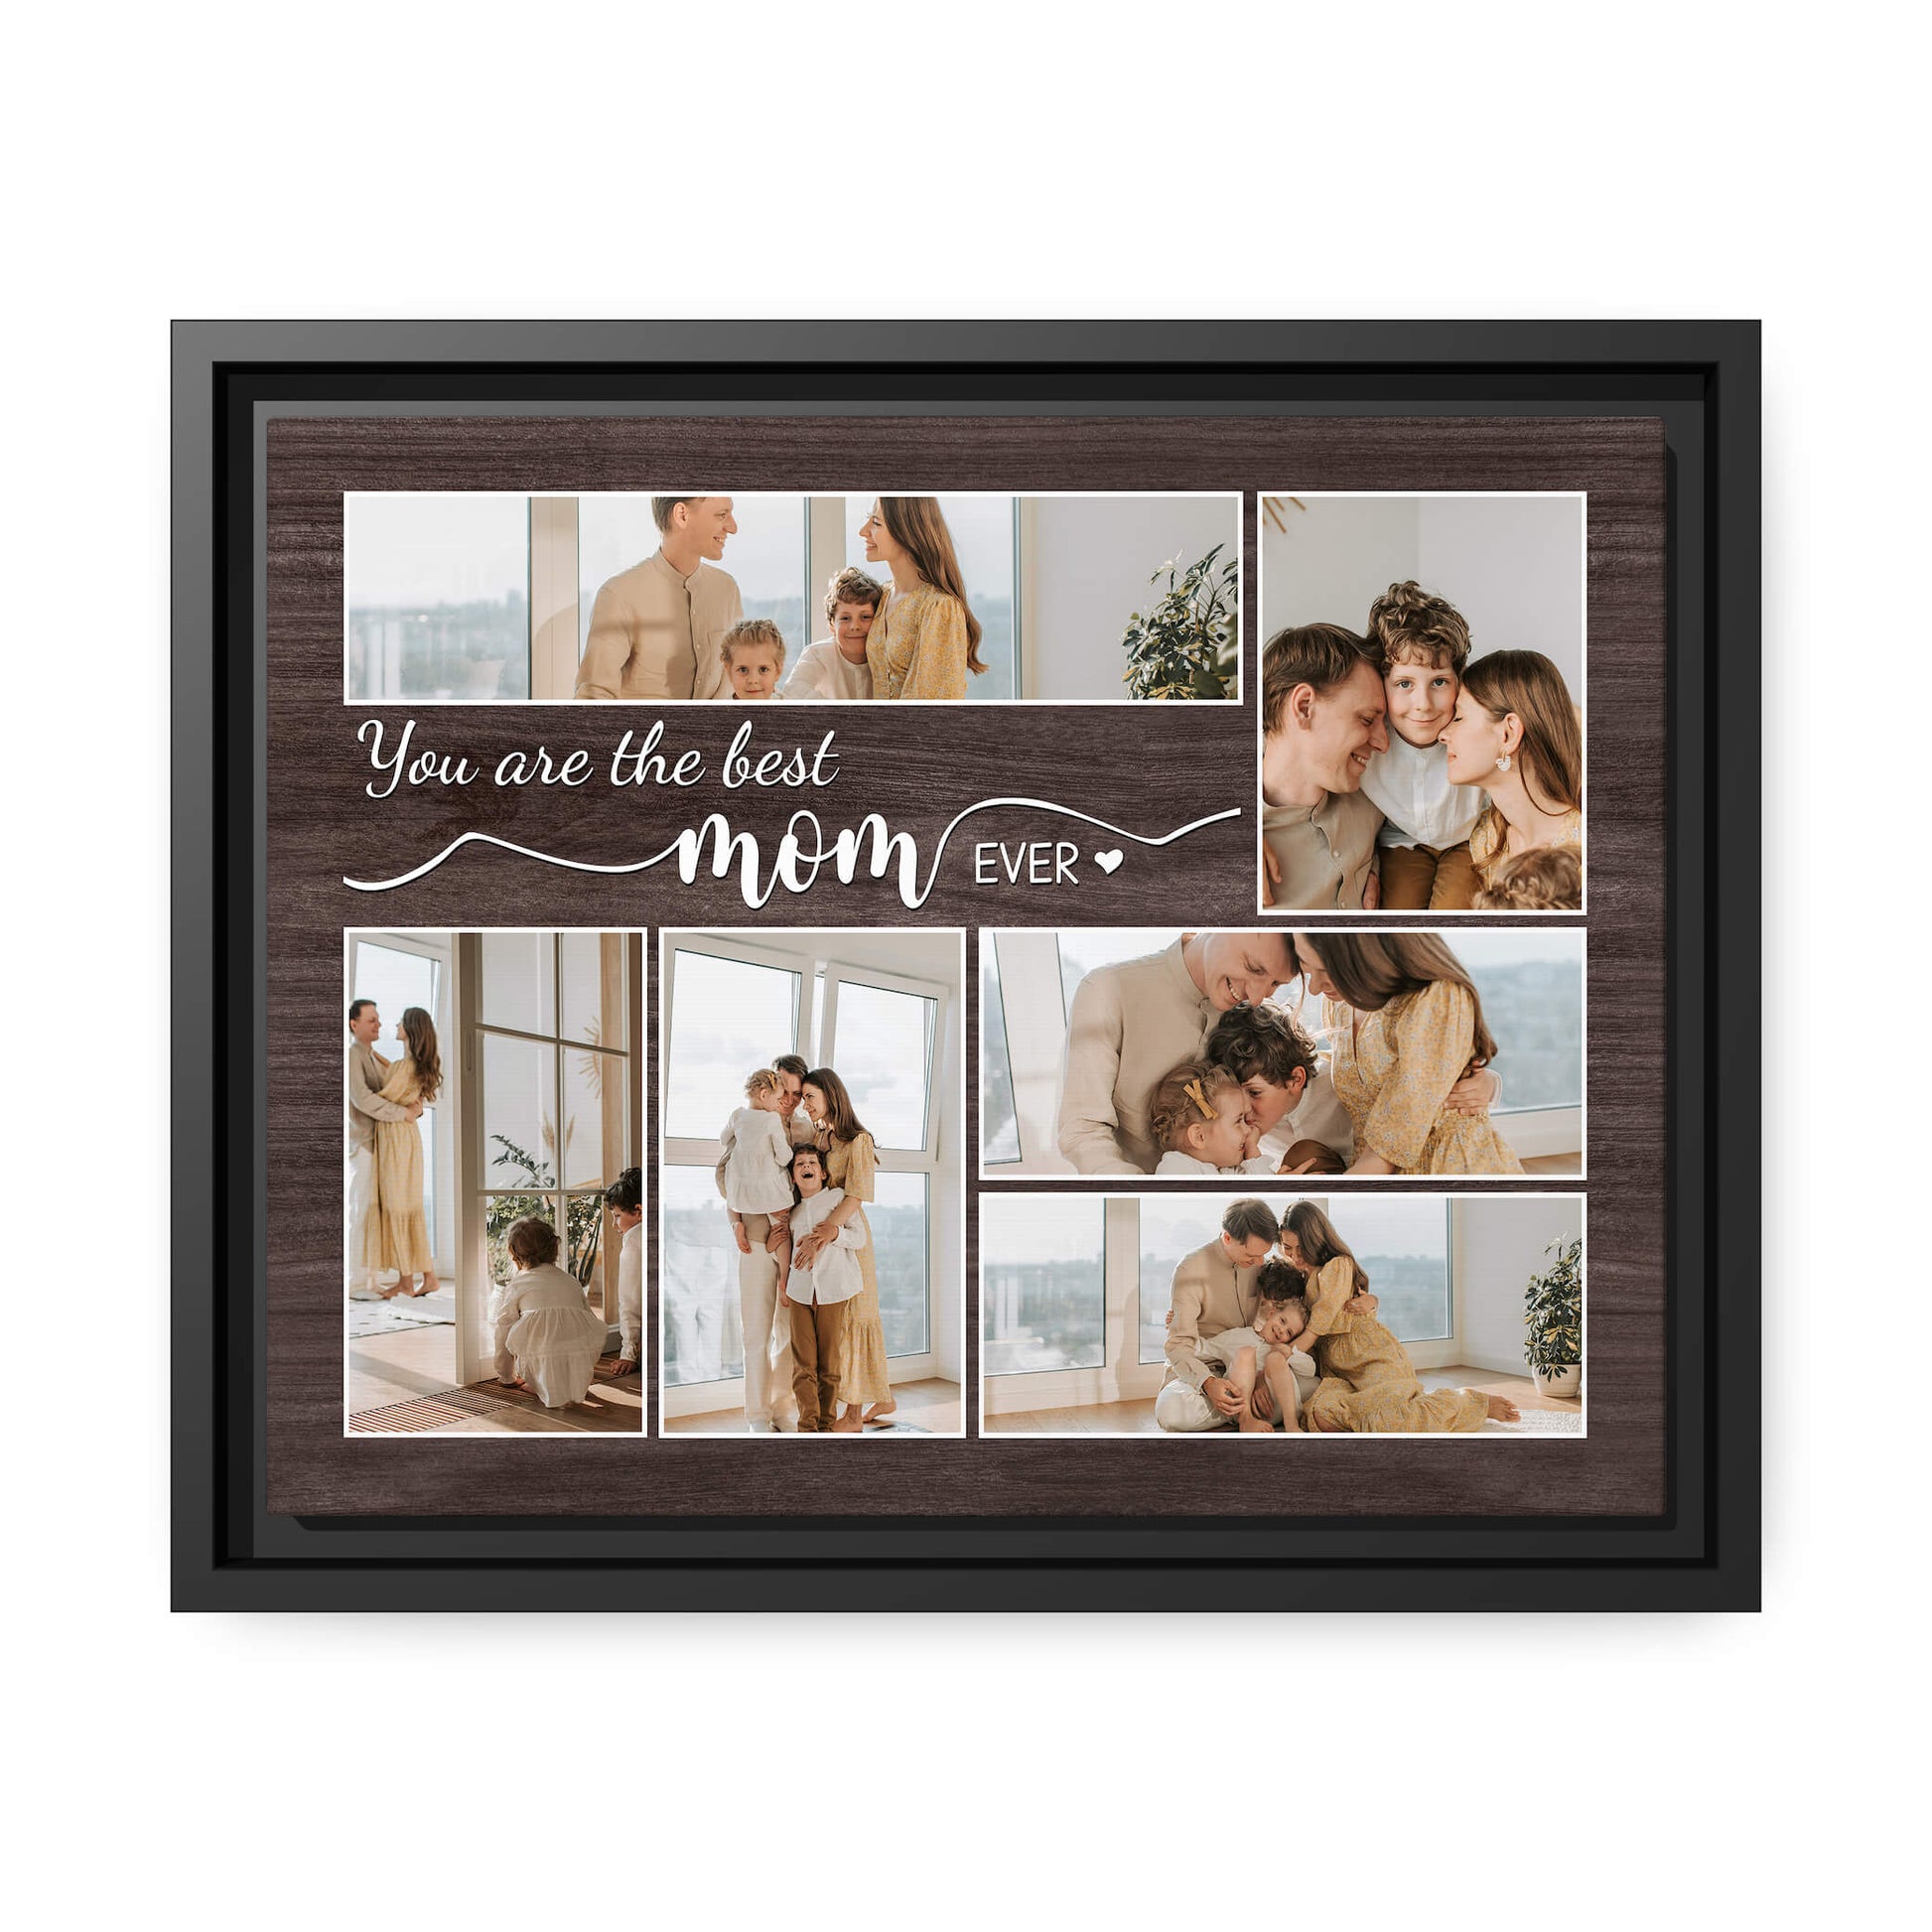 Personalized Mother's Day gift for wife from husband - You are the best mom ever - custom Photo Canvas print - MyMindfulGifts